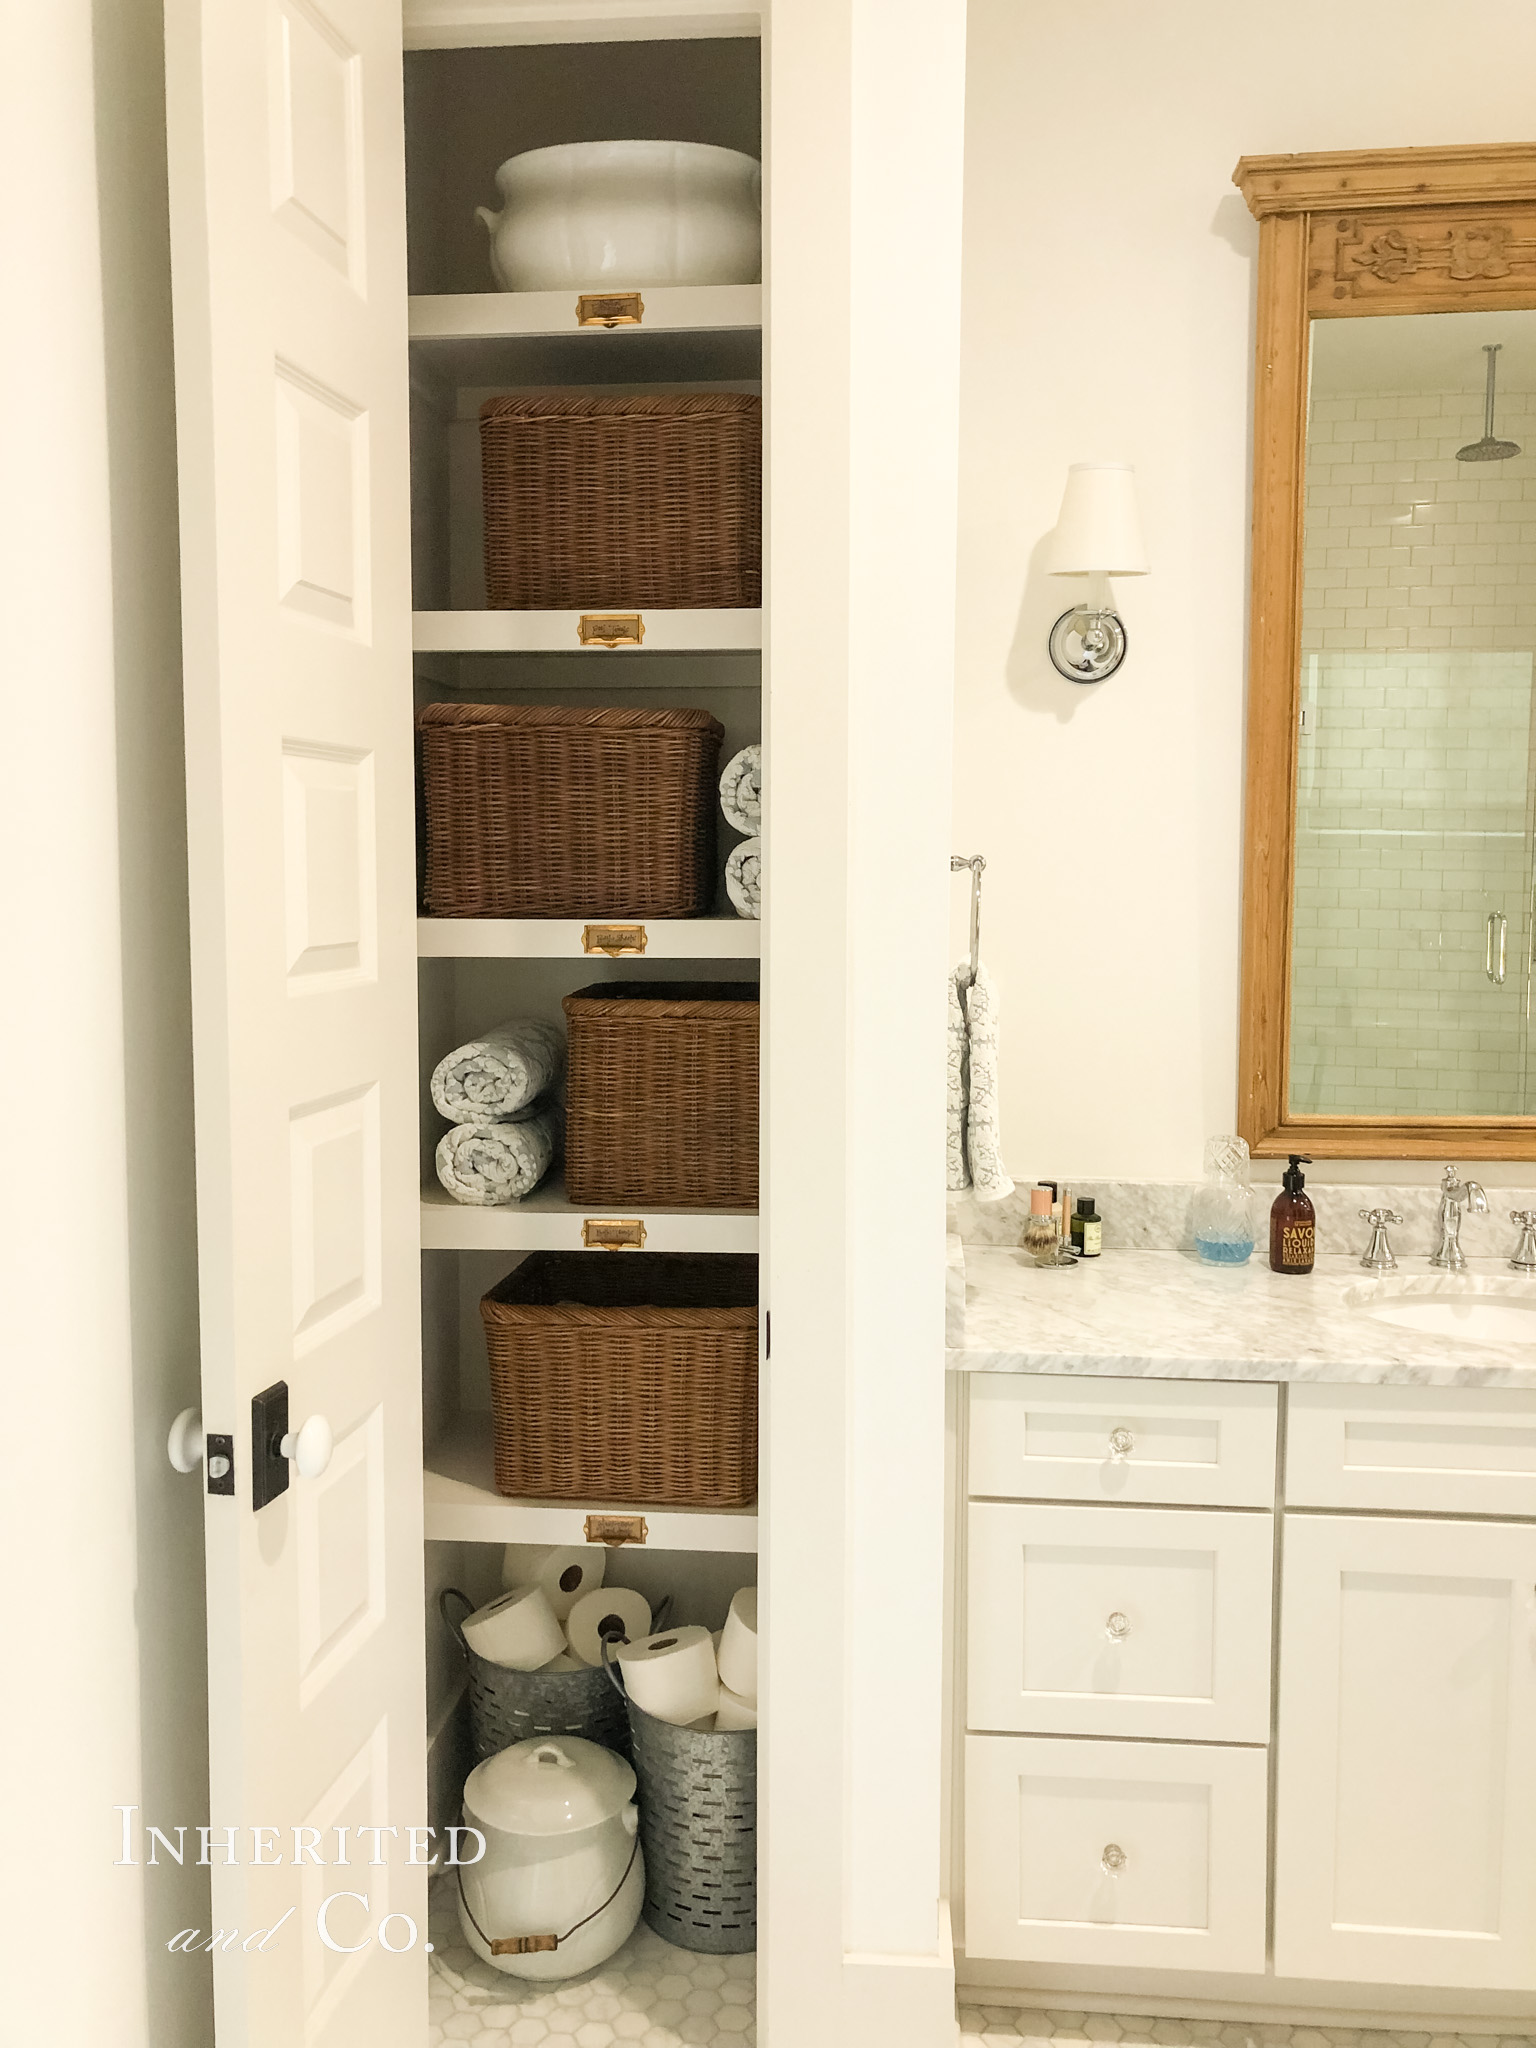 Primary Bathroom with an organized linen closet, featuring antiques and baskets